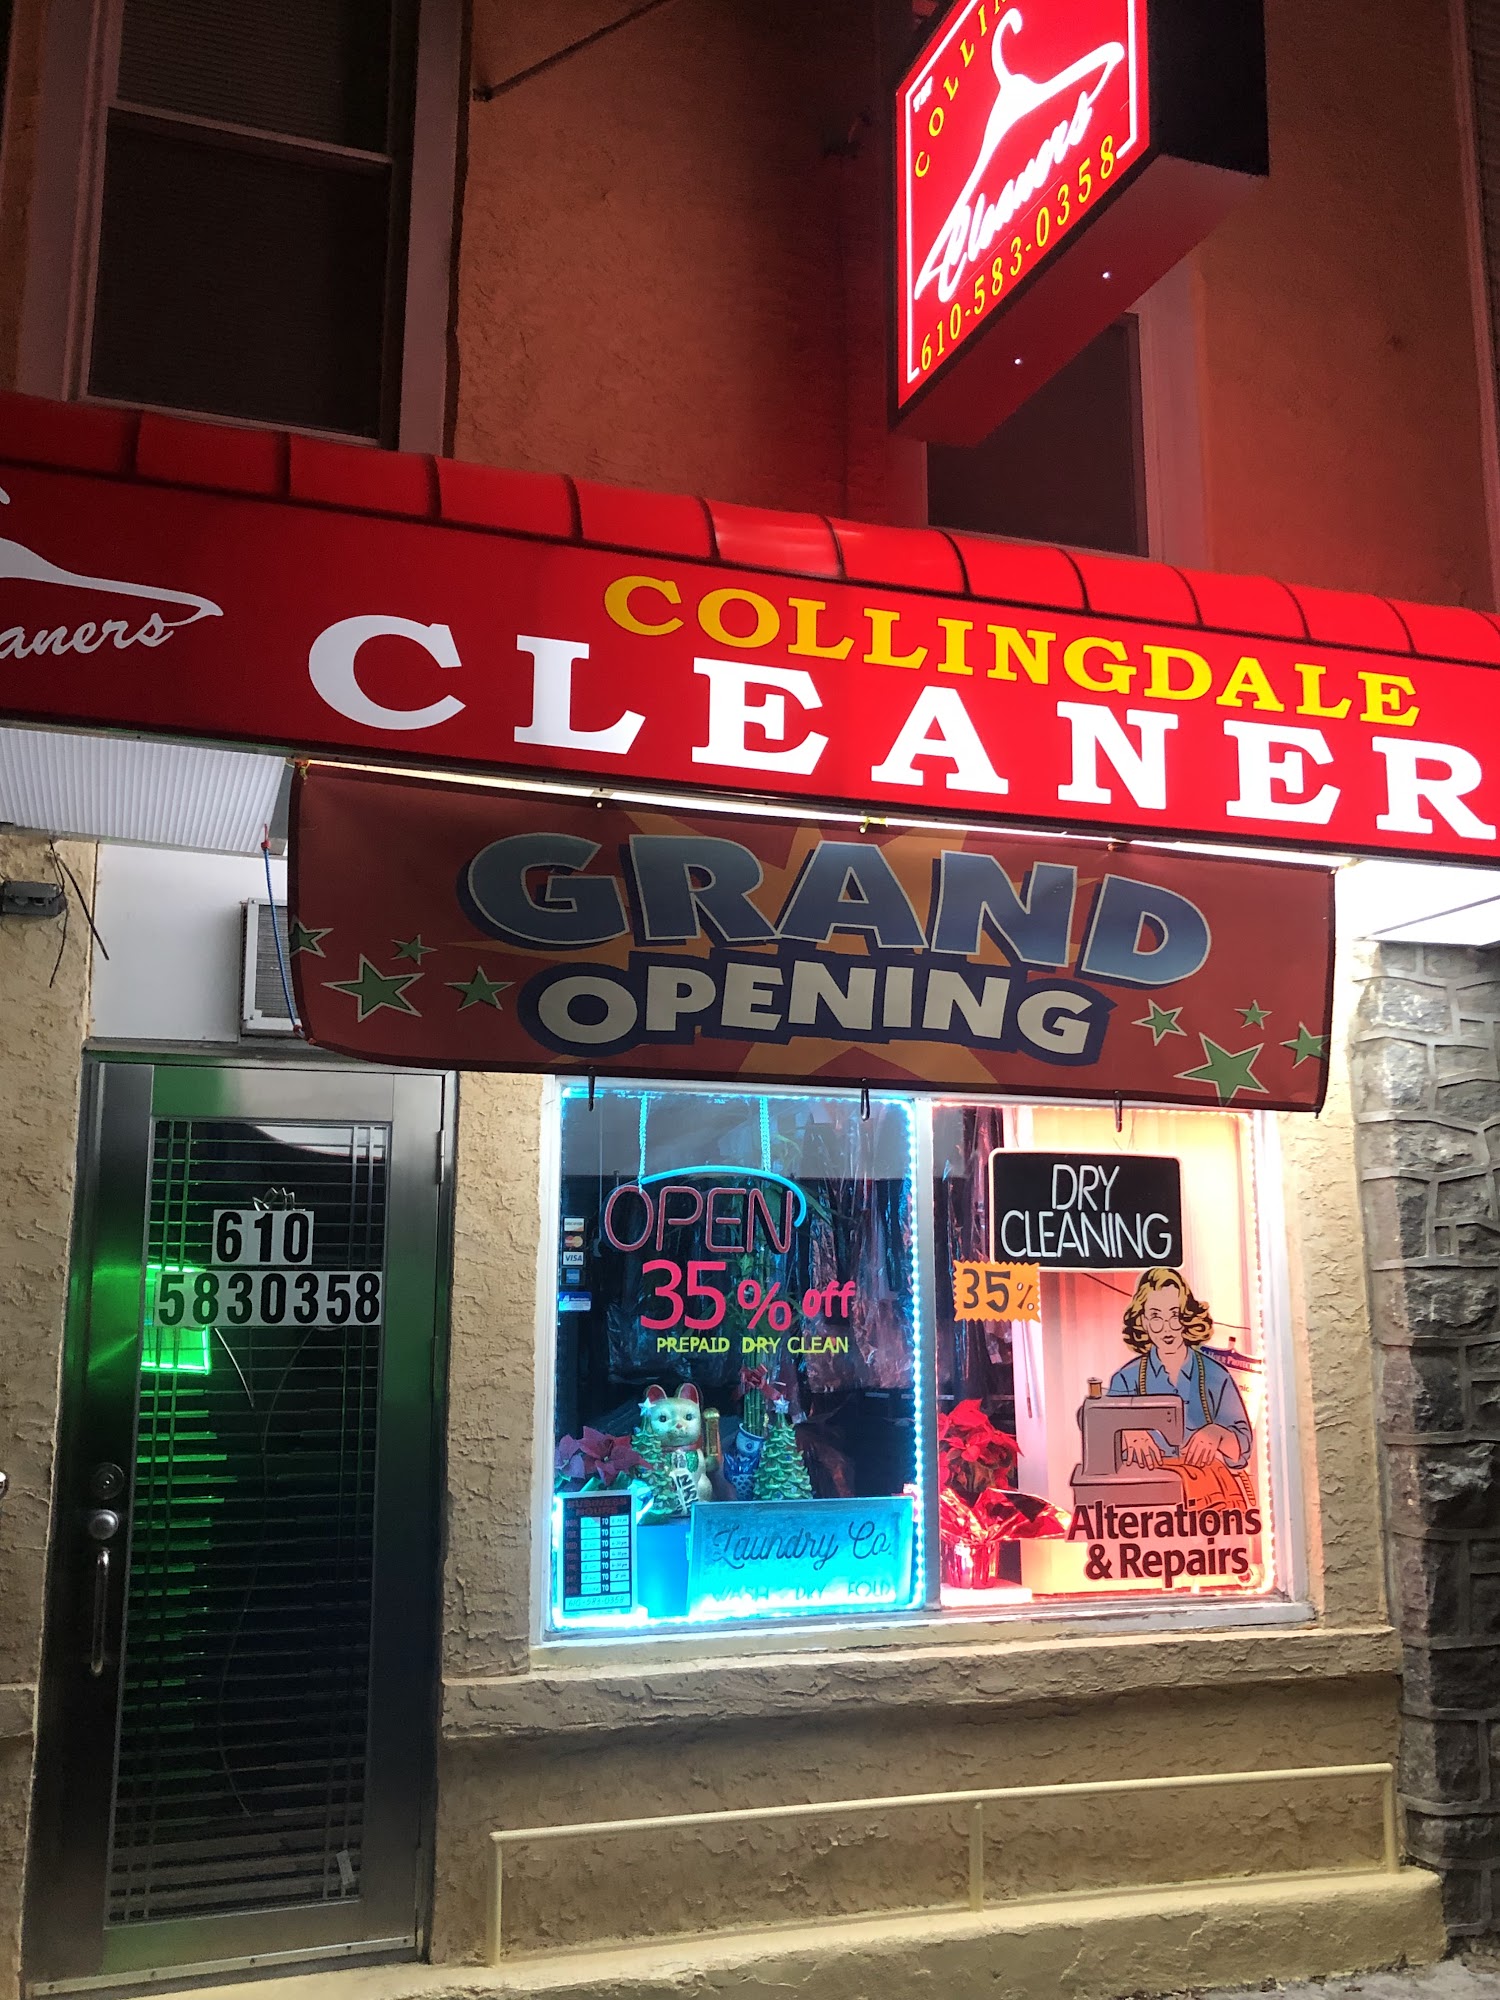 Collingdale Cleaners and Alterations 717 MacDade Blvd, Collingdale Pennsylvania 19023